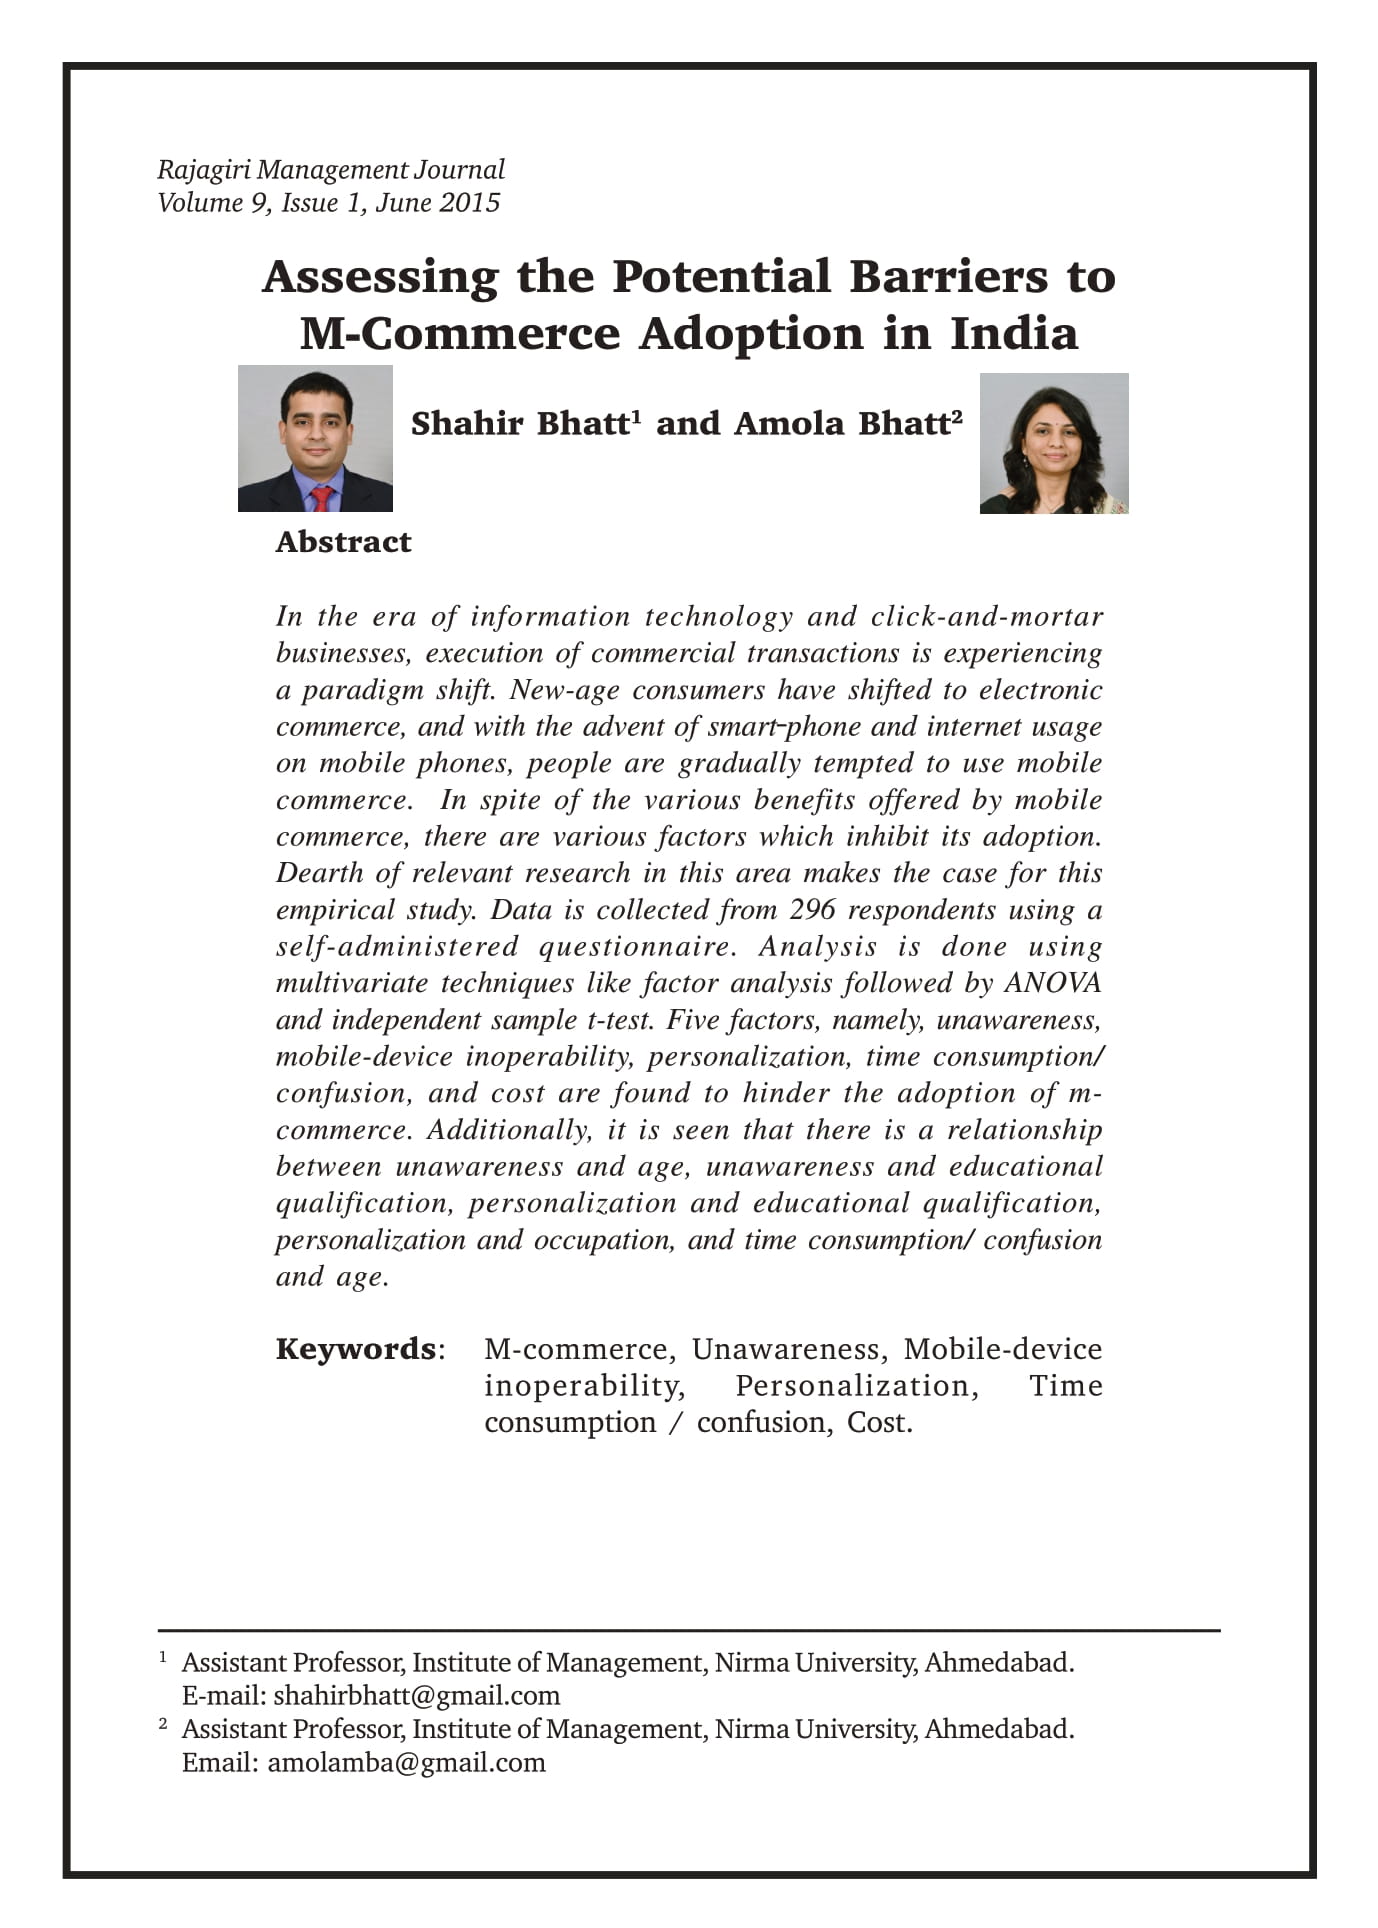 Assessing the Potential Barriers to M-Commerce Adoption in India